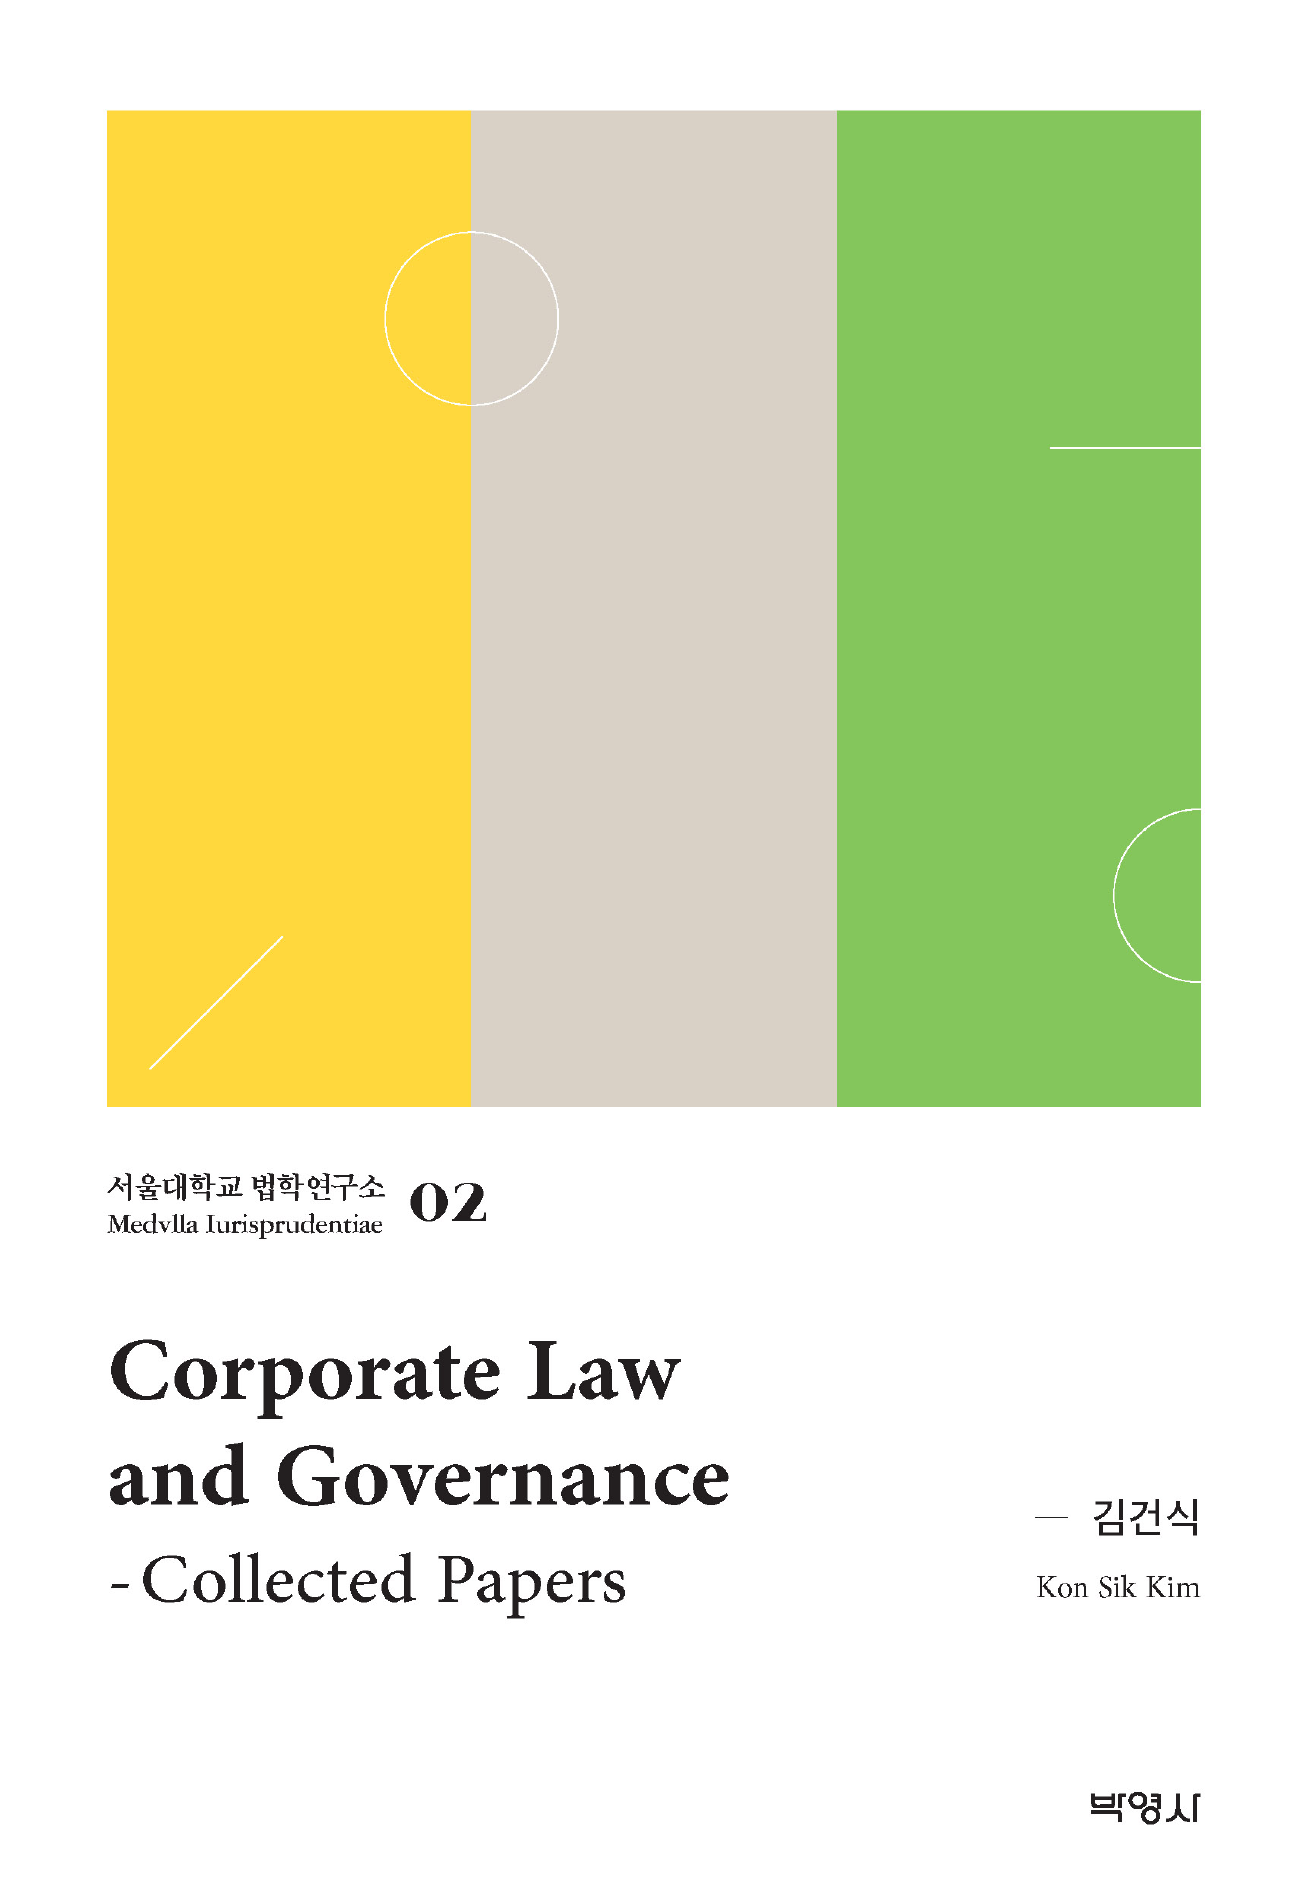 Corporate Law and Governance(Collected Papers)